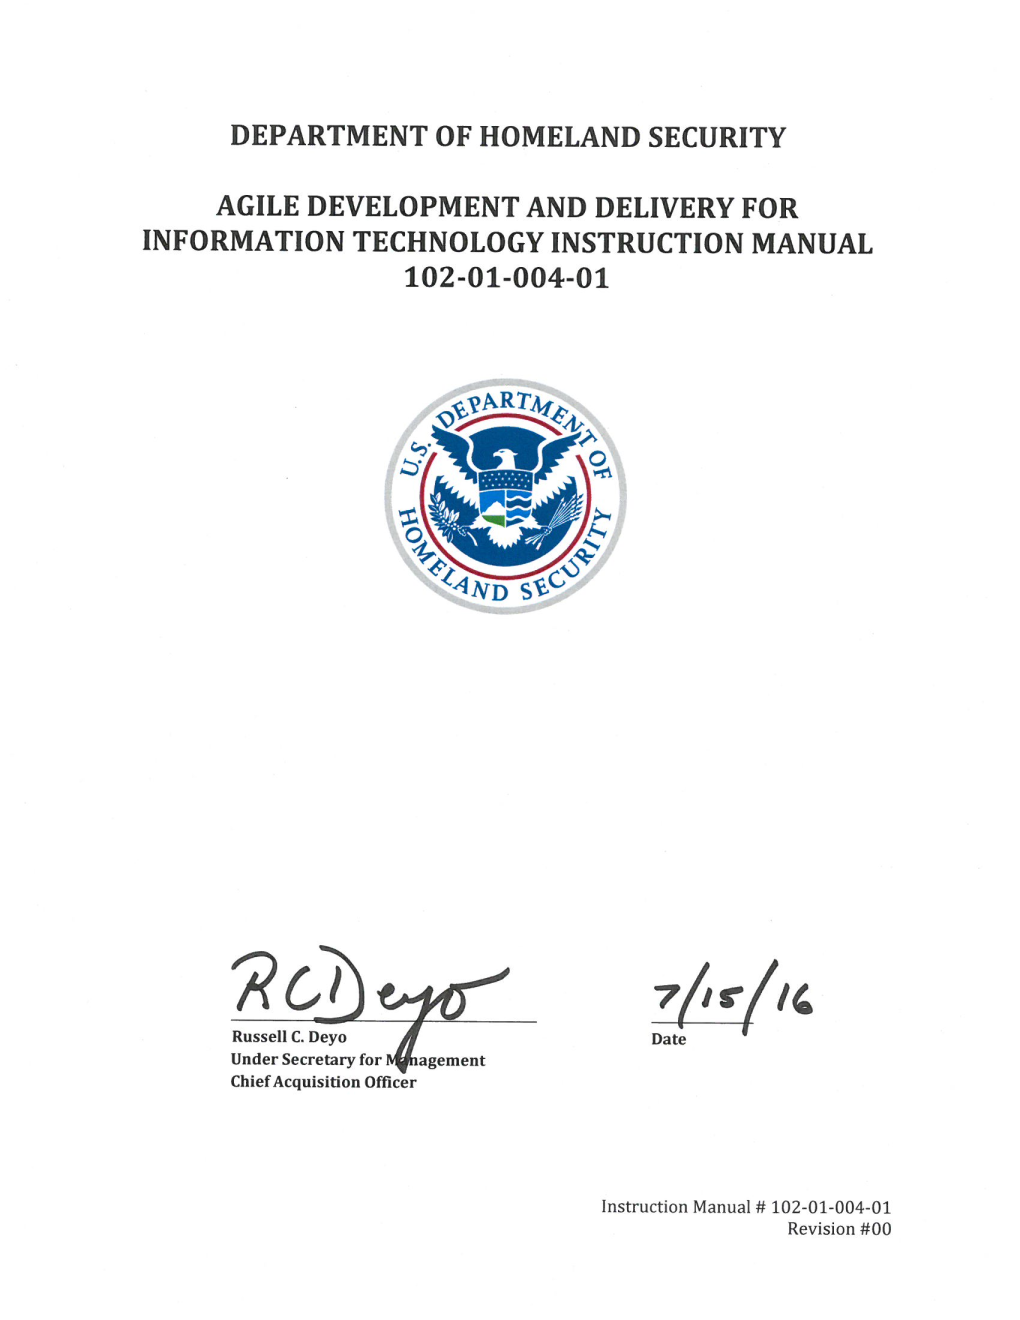 DHS Agile Development and Delivery for Information Technology Instruction States That Agile Is the Preferred IT Development Approach